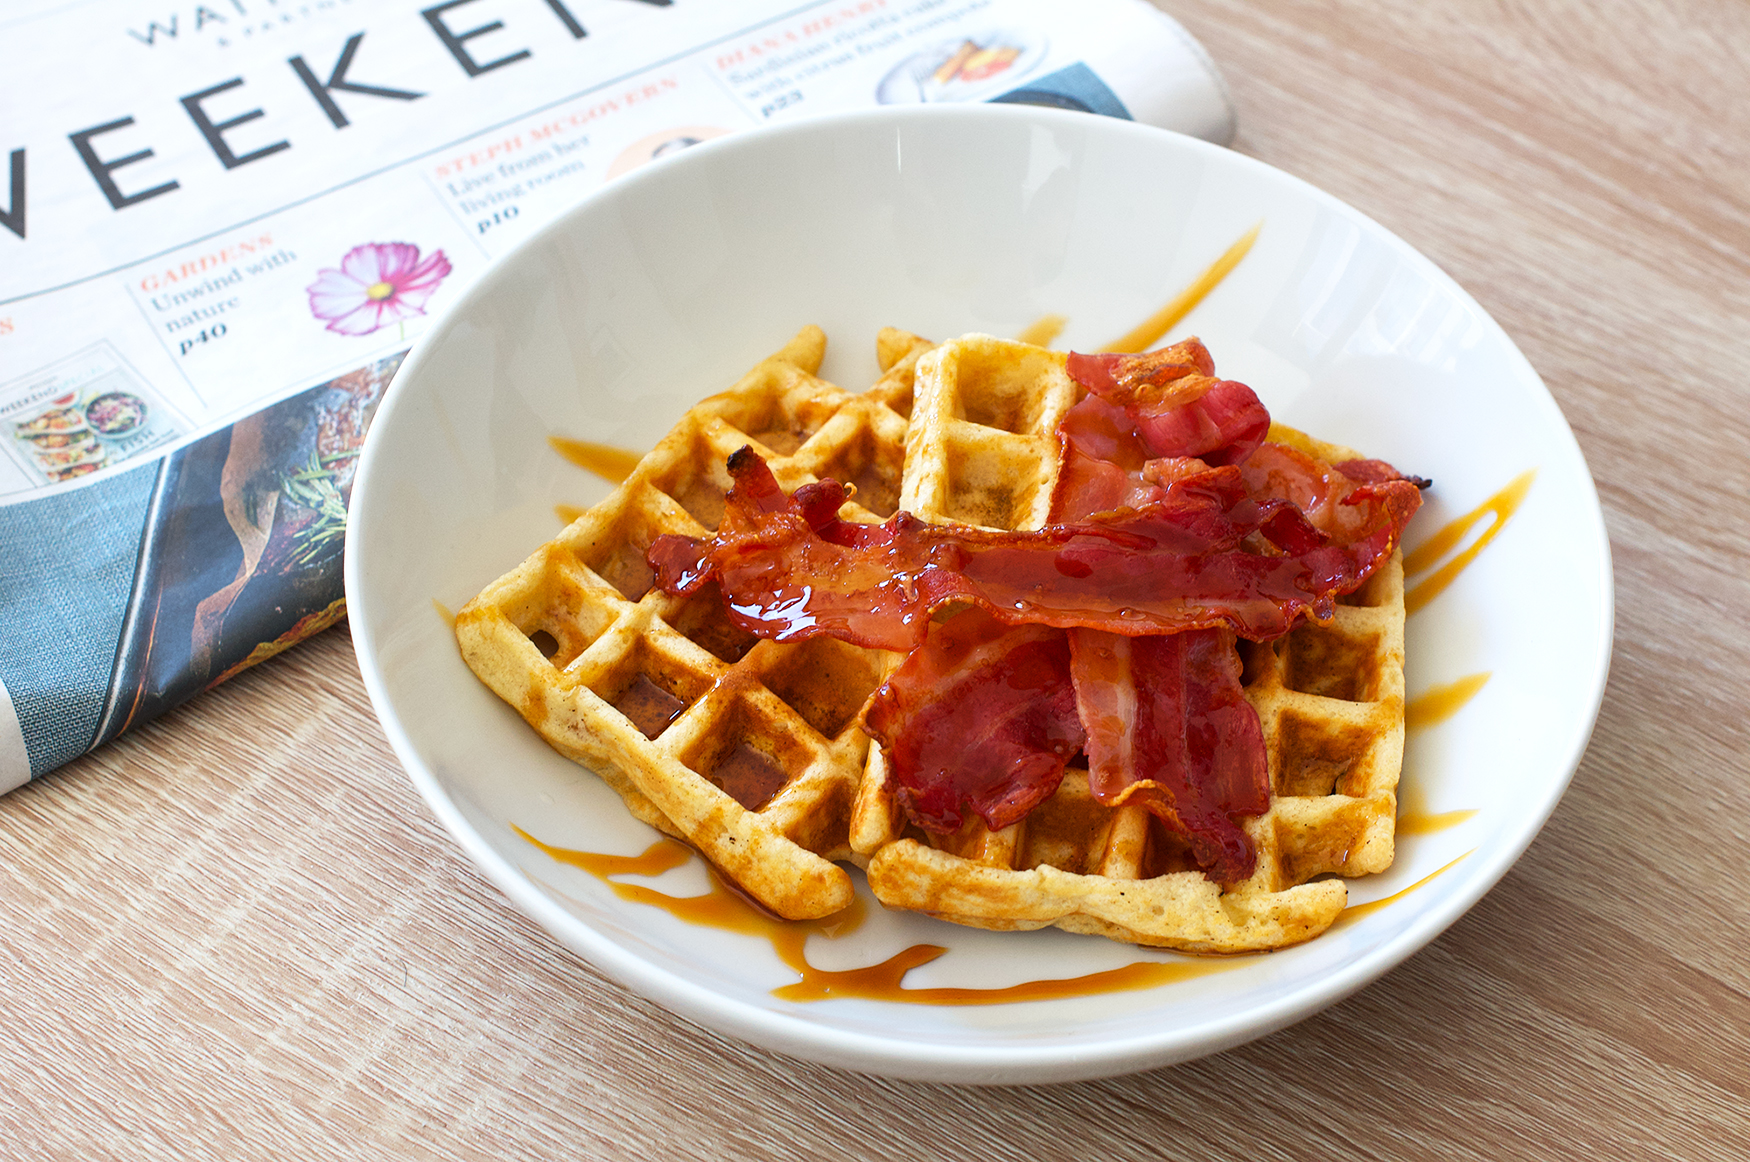 Recipe for breakfast waffles with bacon and syrup